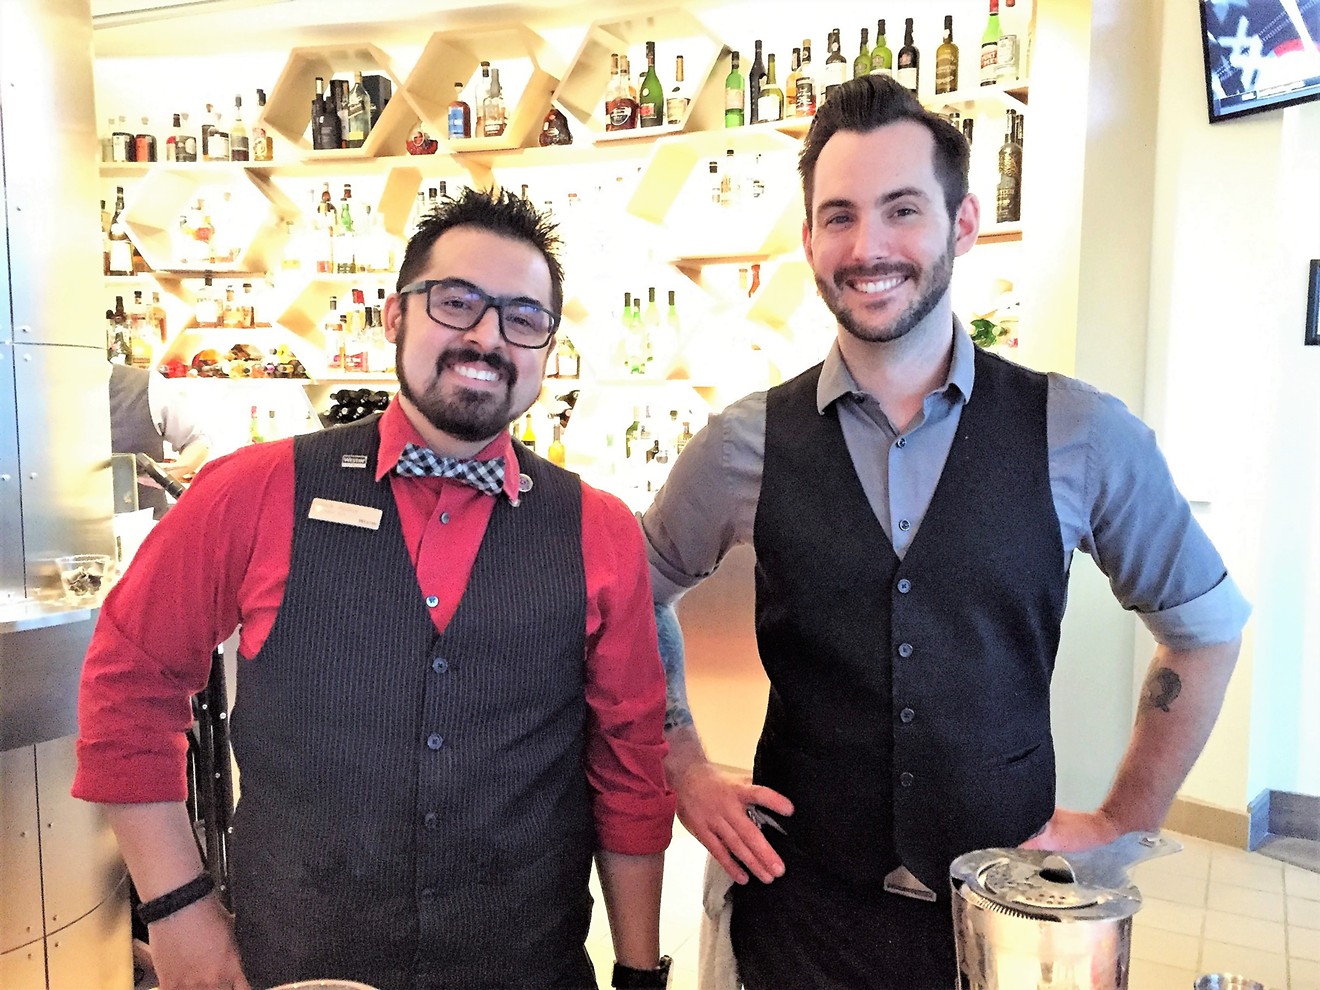 Patrick Abalos (left) and Justin Ware (right) will compete in the USBG Regional finals in May.